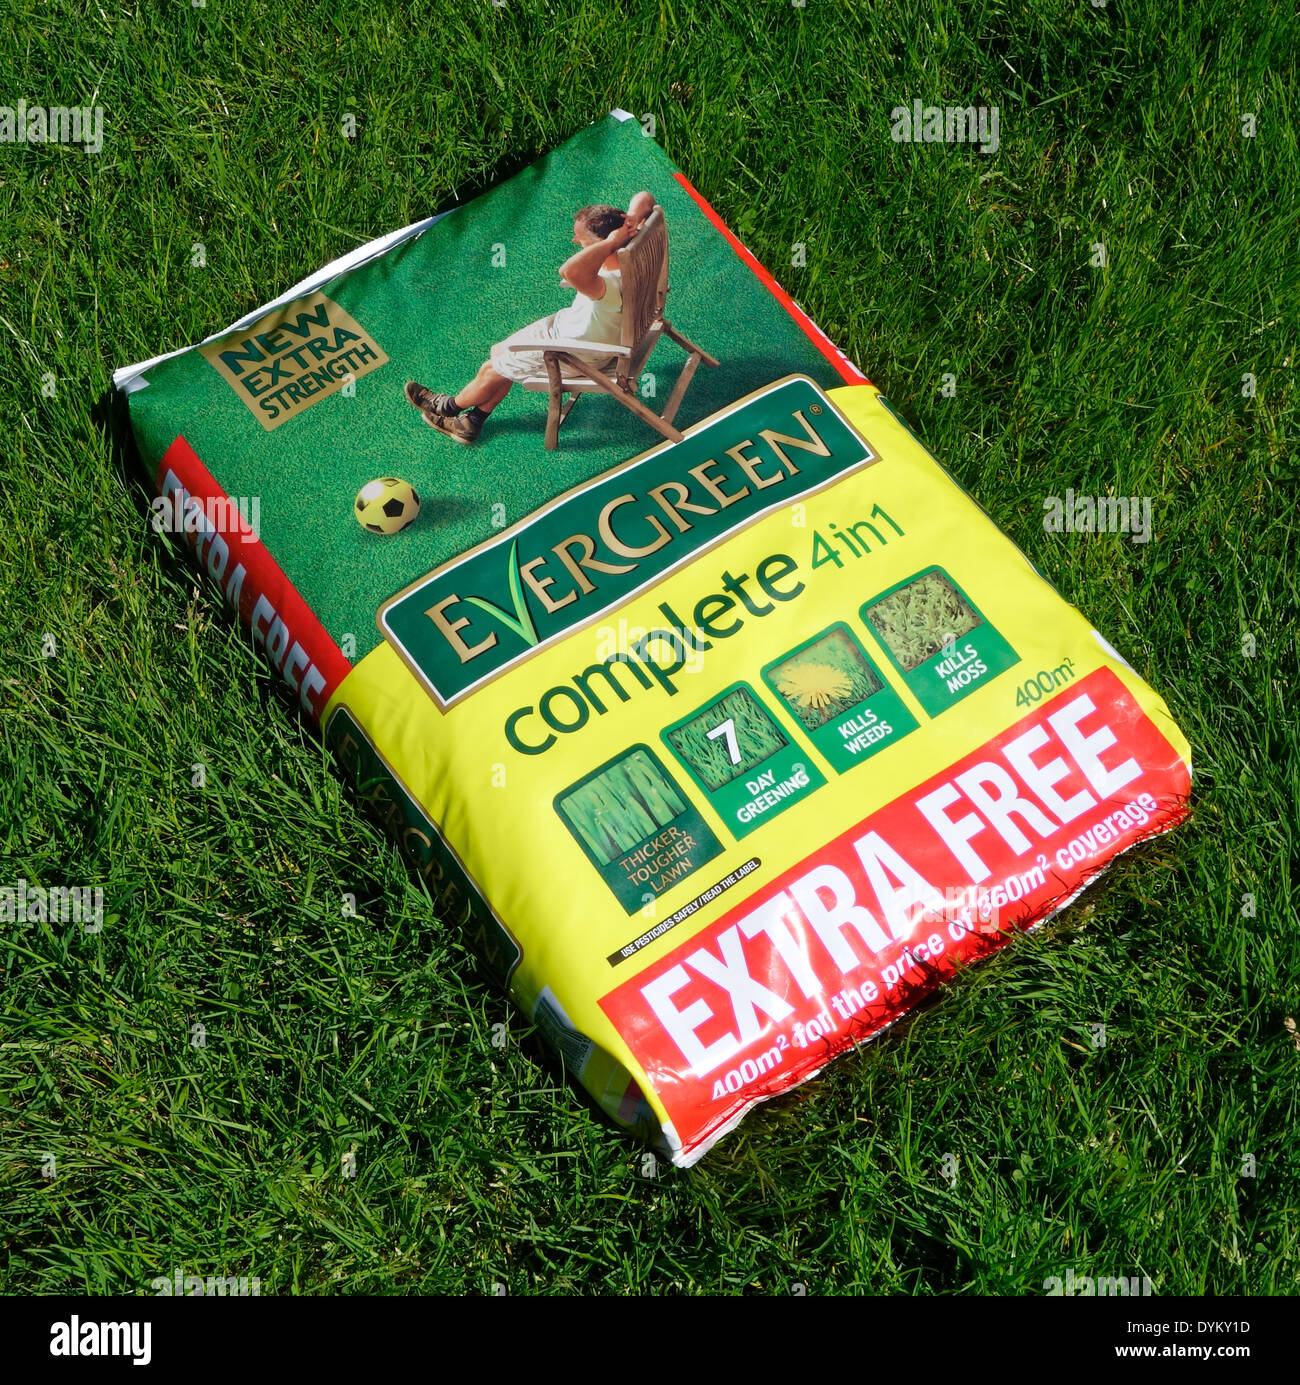 Scotts Evergreen Complete 4 in 1 Granulated Lawn Weed, Feed and Mosskiller on a Lawn Stock Photo